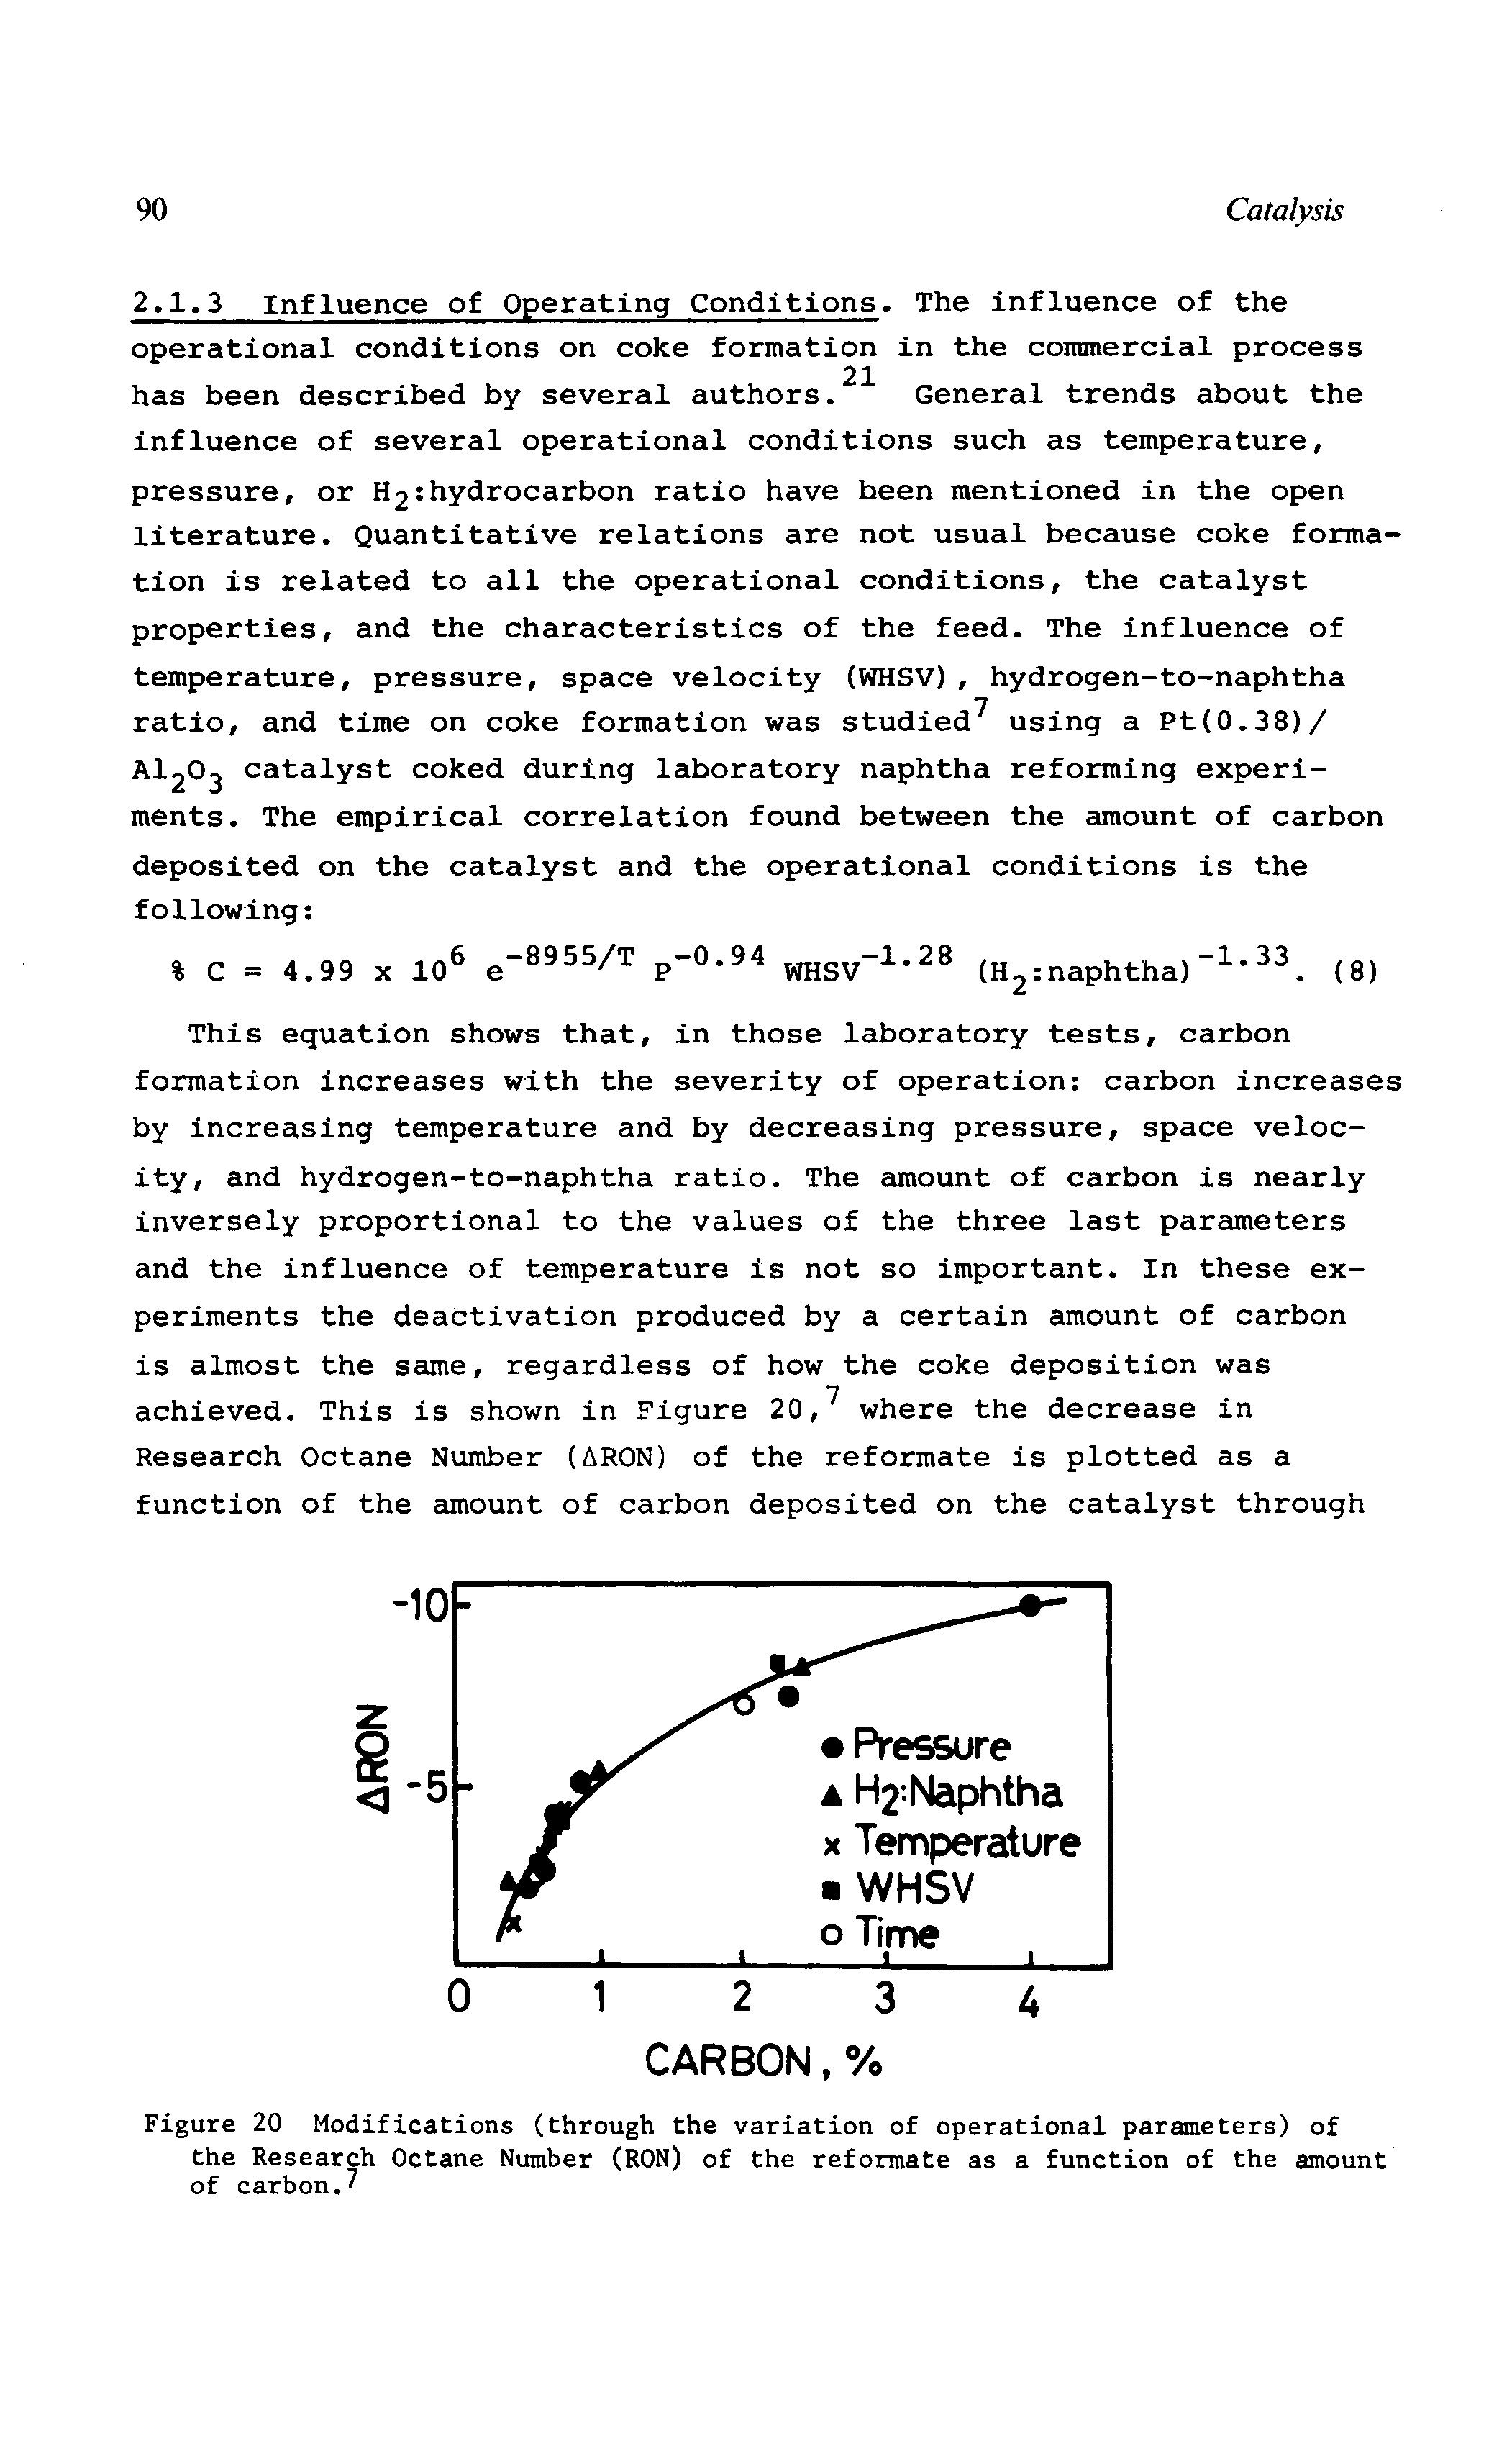 Figure 20 Modifications (through the variation of operational parameters) of the Research Octane Number (RON) of the reformate as a function of the amount of carbon./...